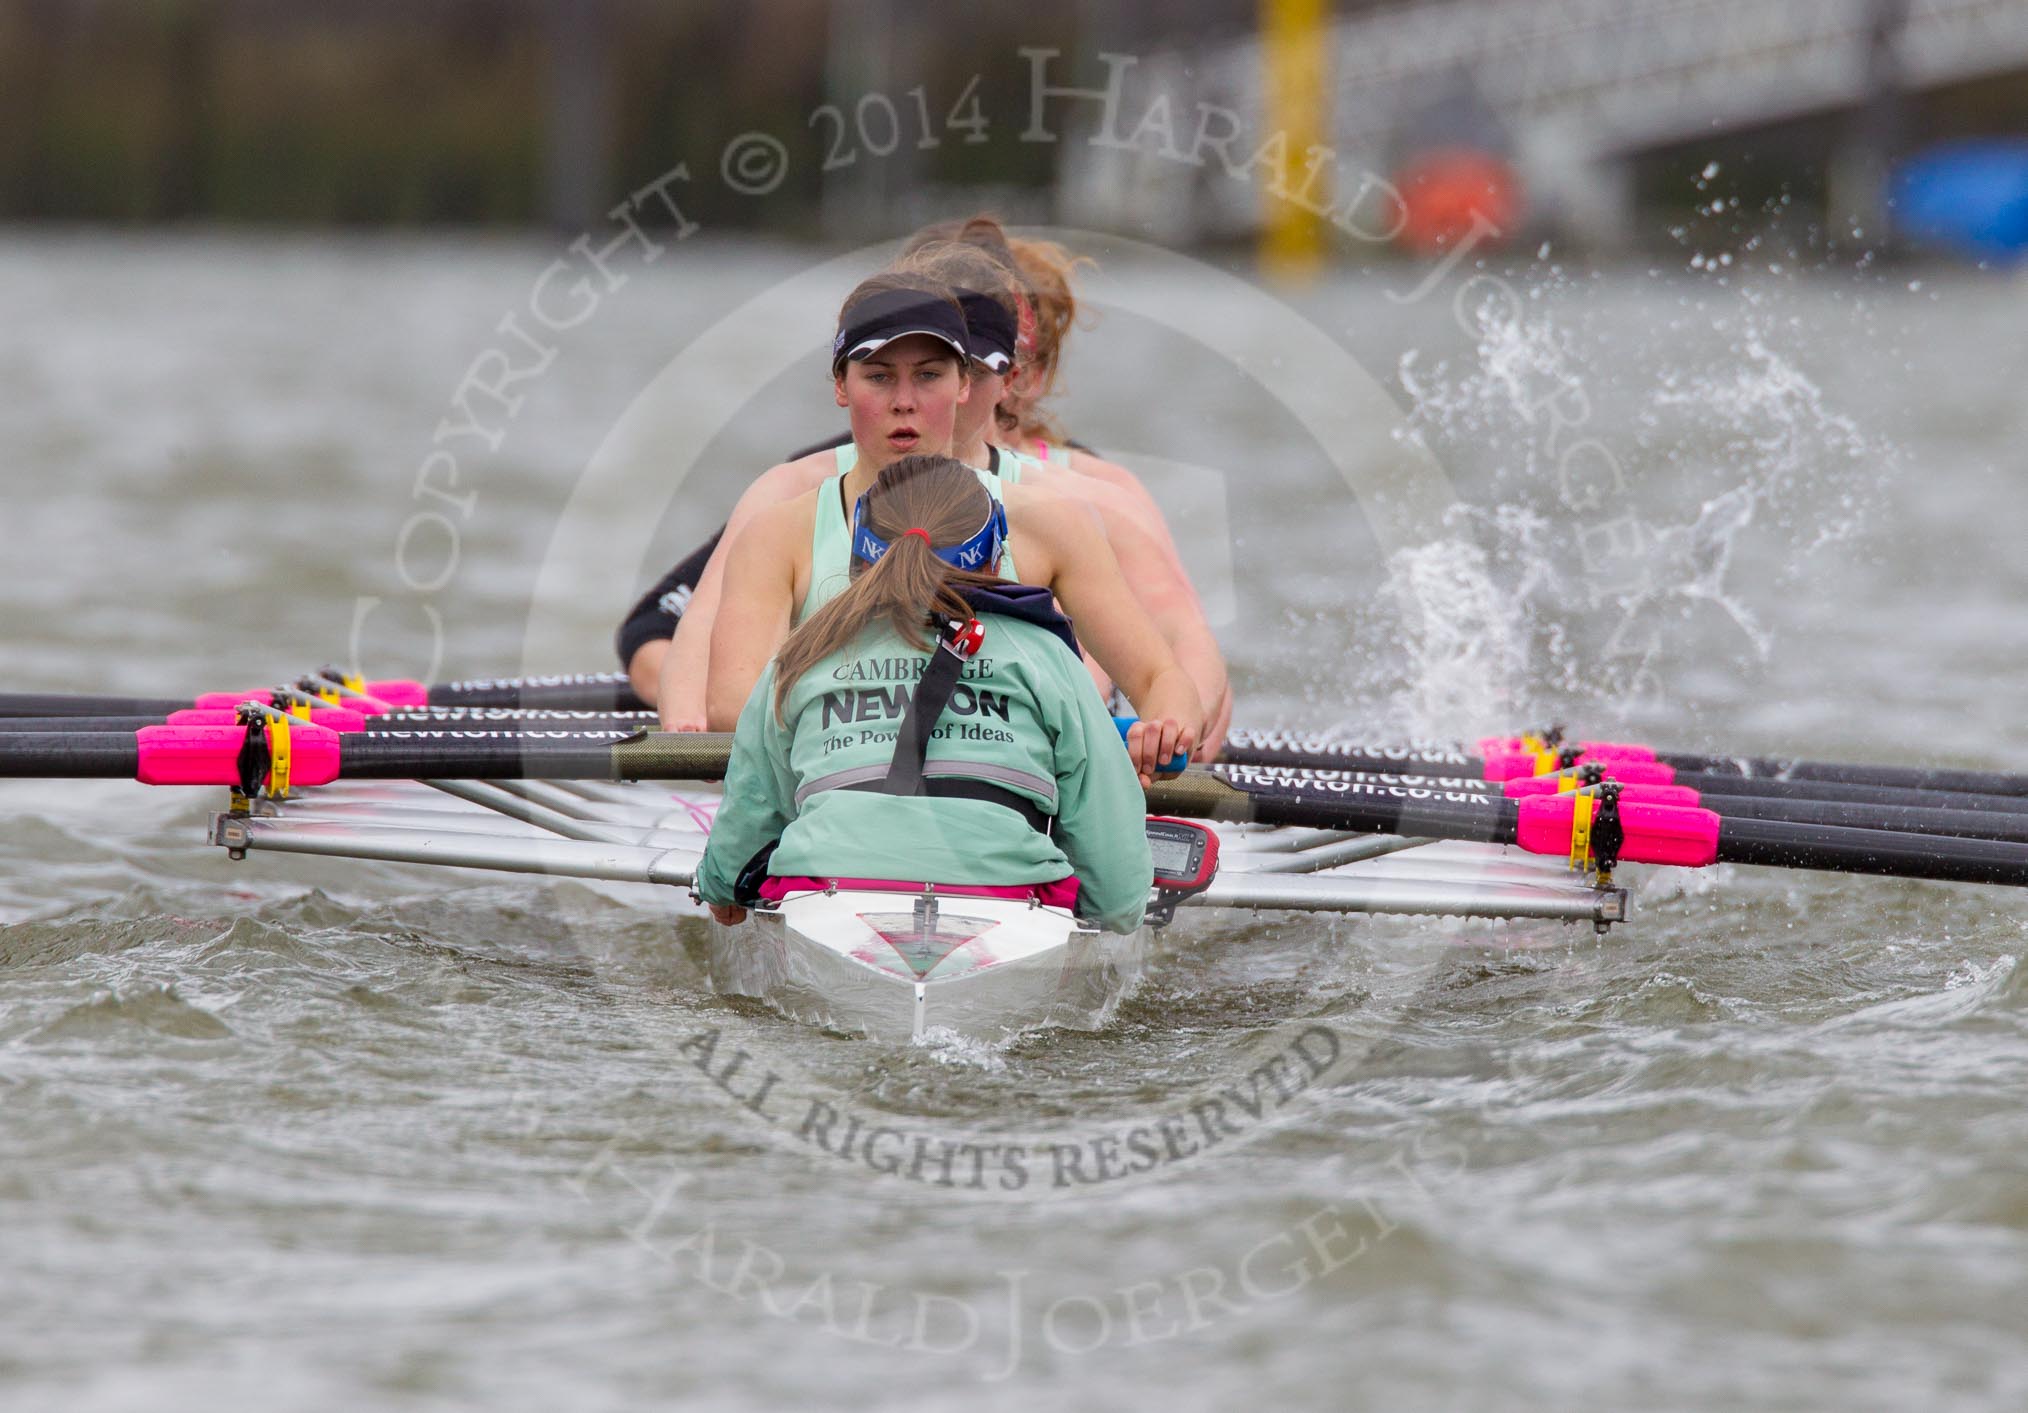 The Boat Race season 2014 - fixture CUWBC vs Thames RC.




on 02 March 2014 at 13:15, image #101